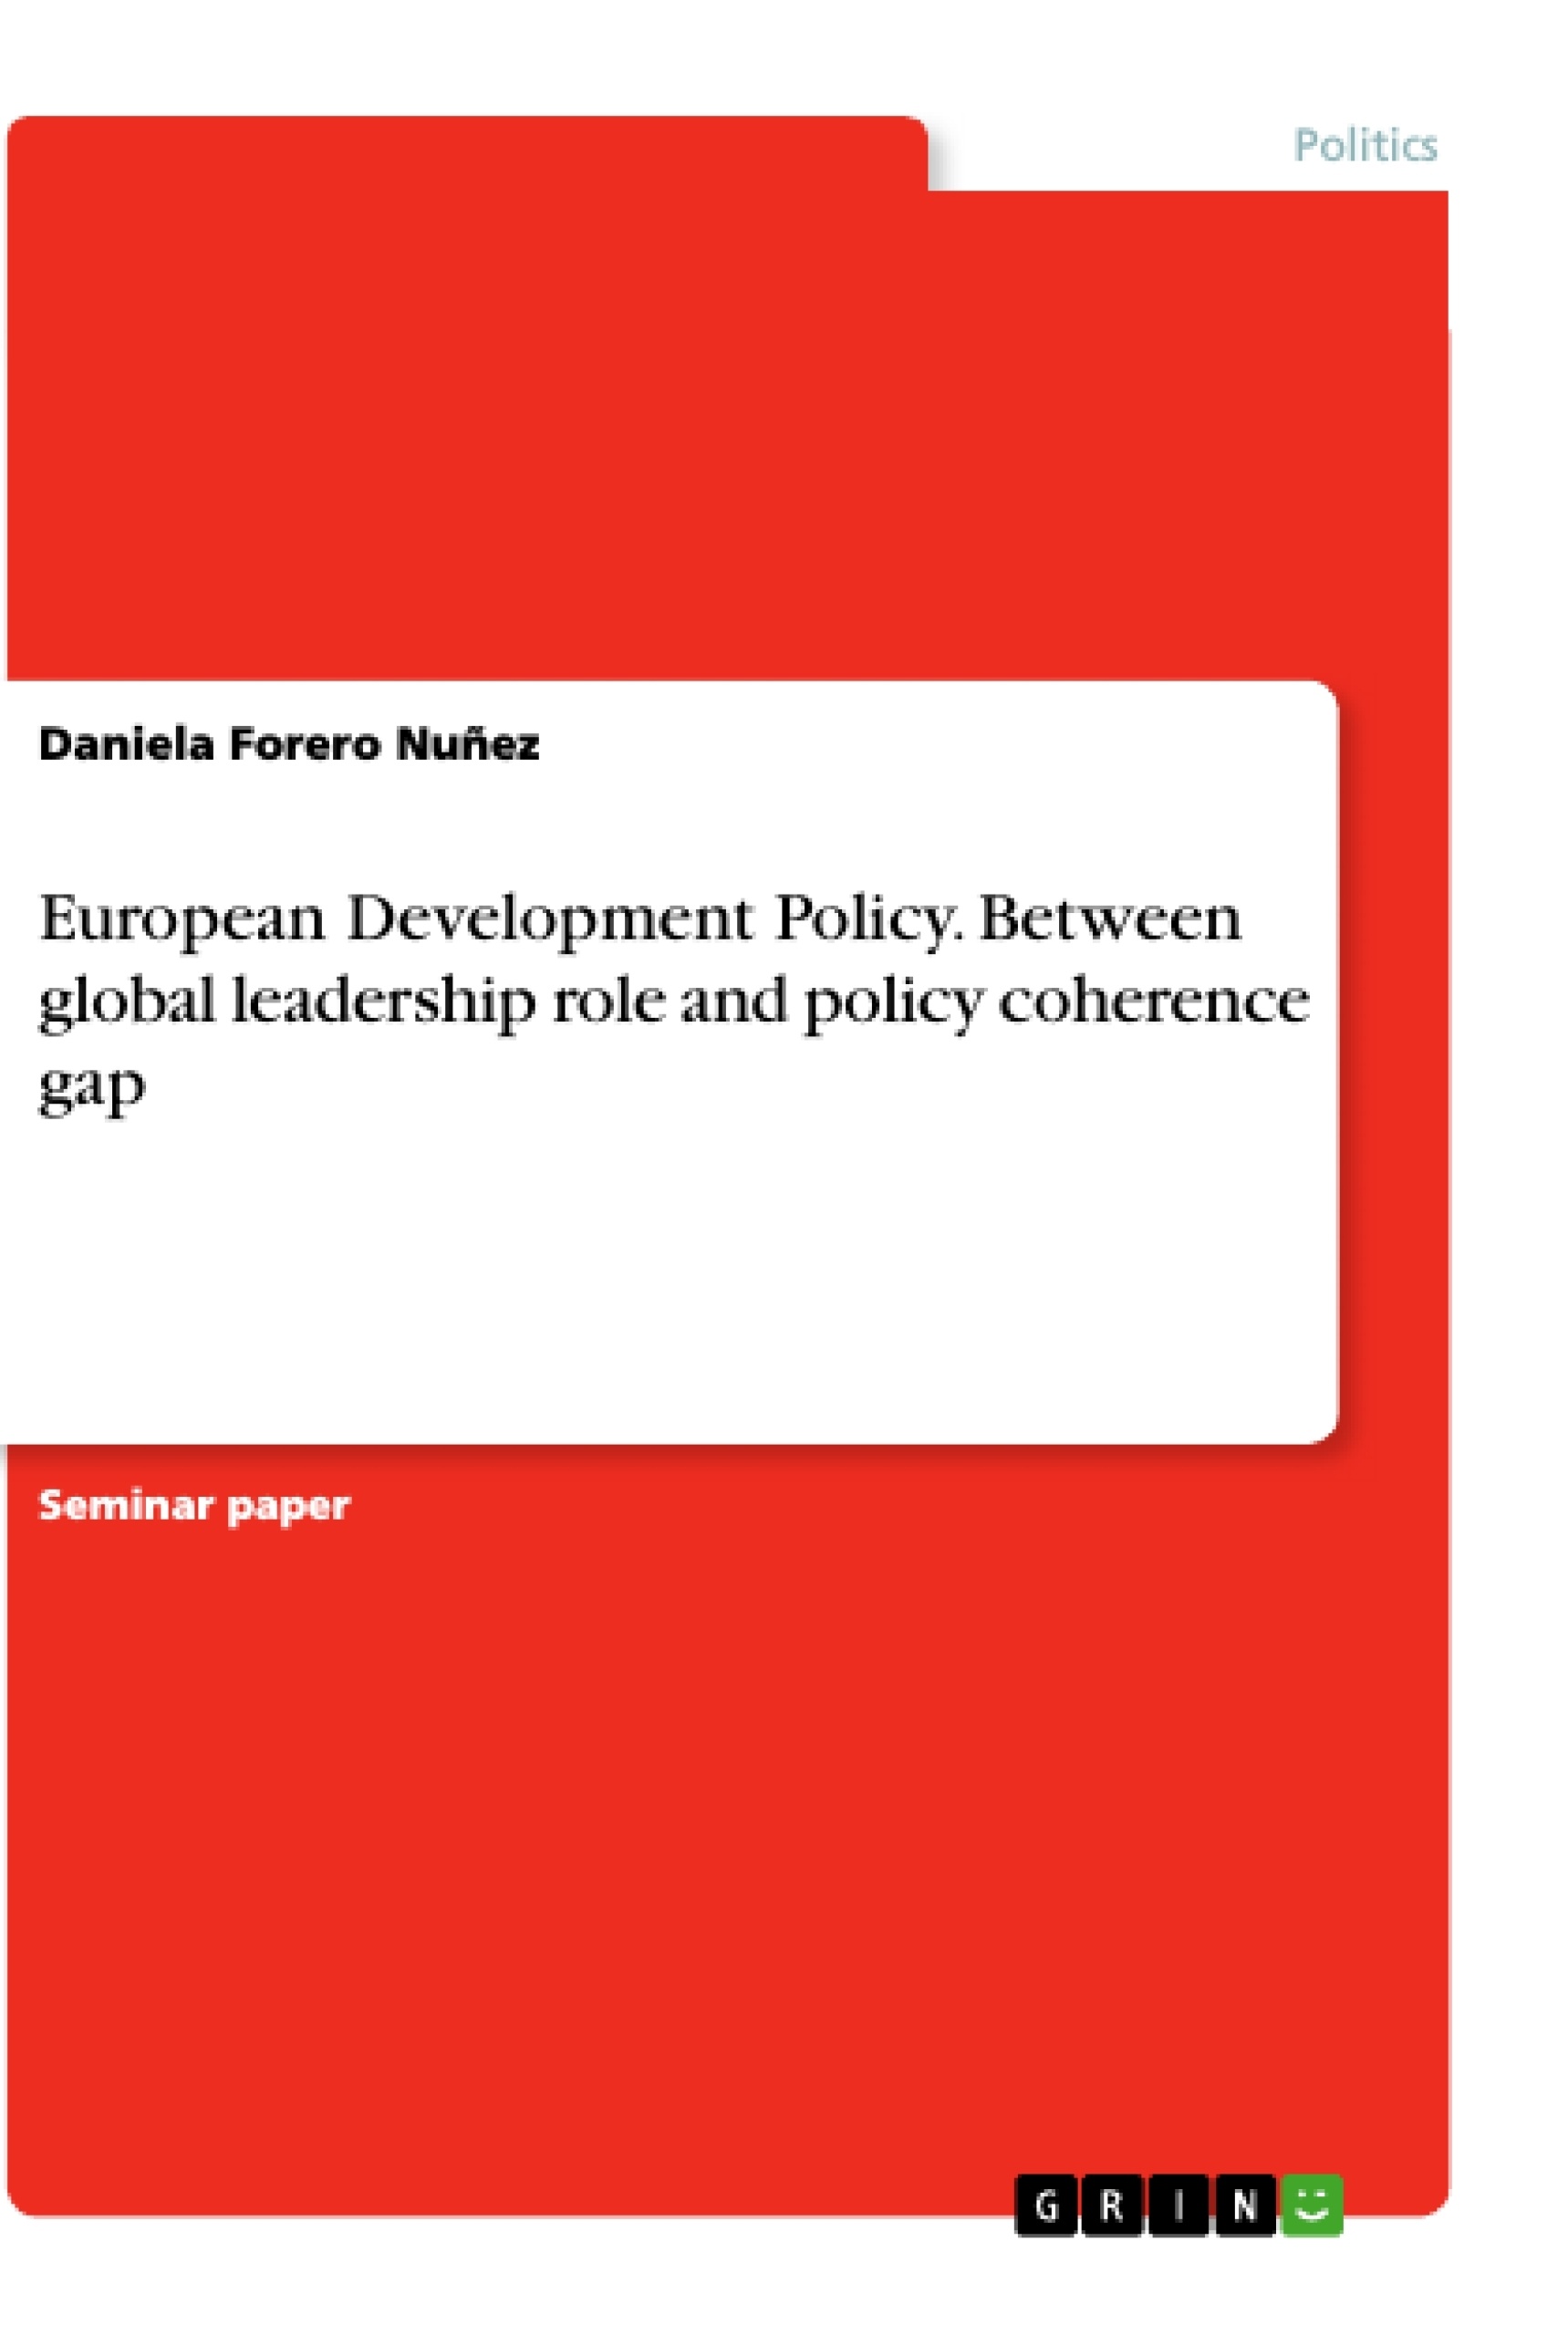 Title: European Development Policy. Between global leadership role and policy coherence gap